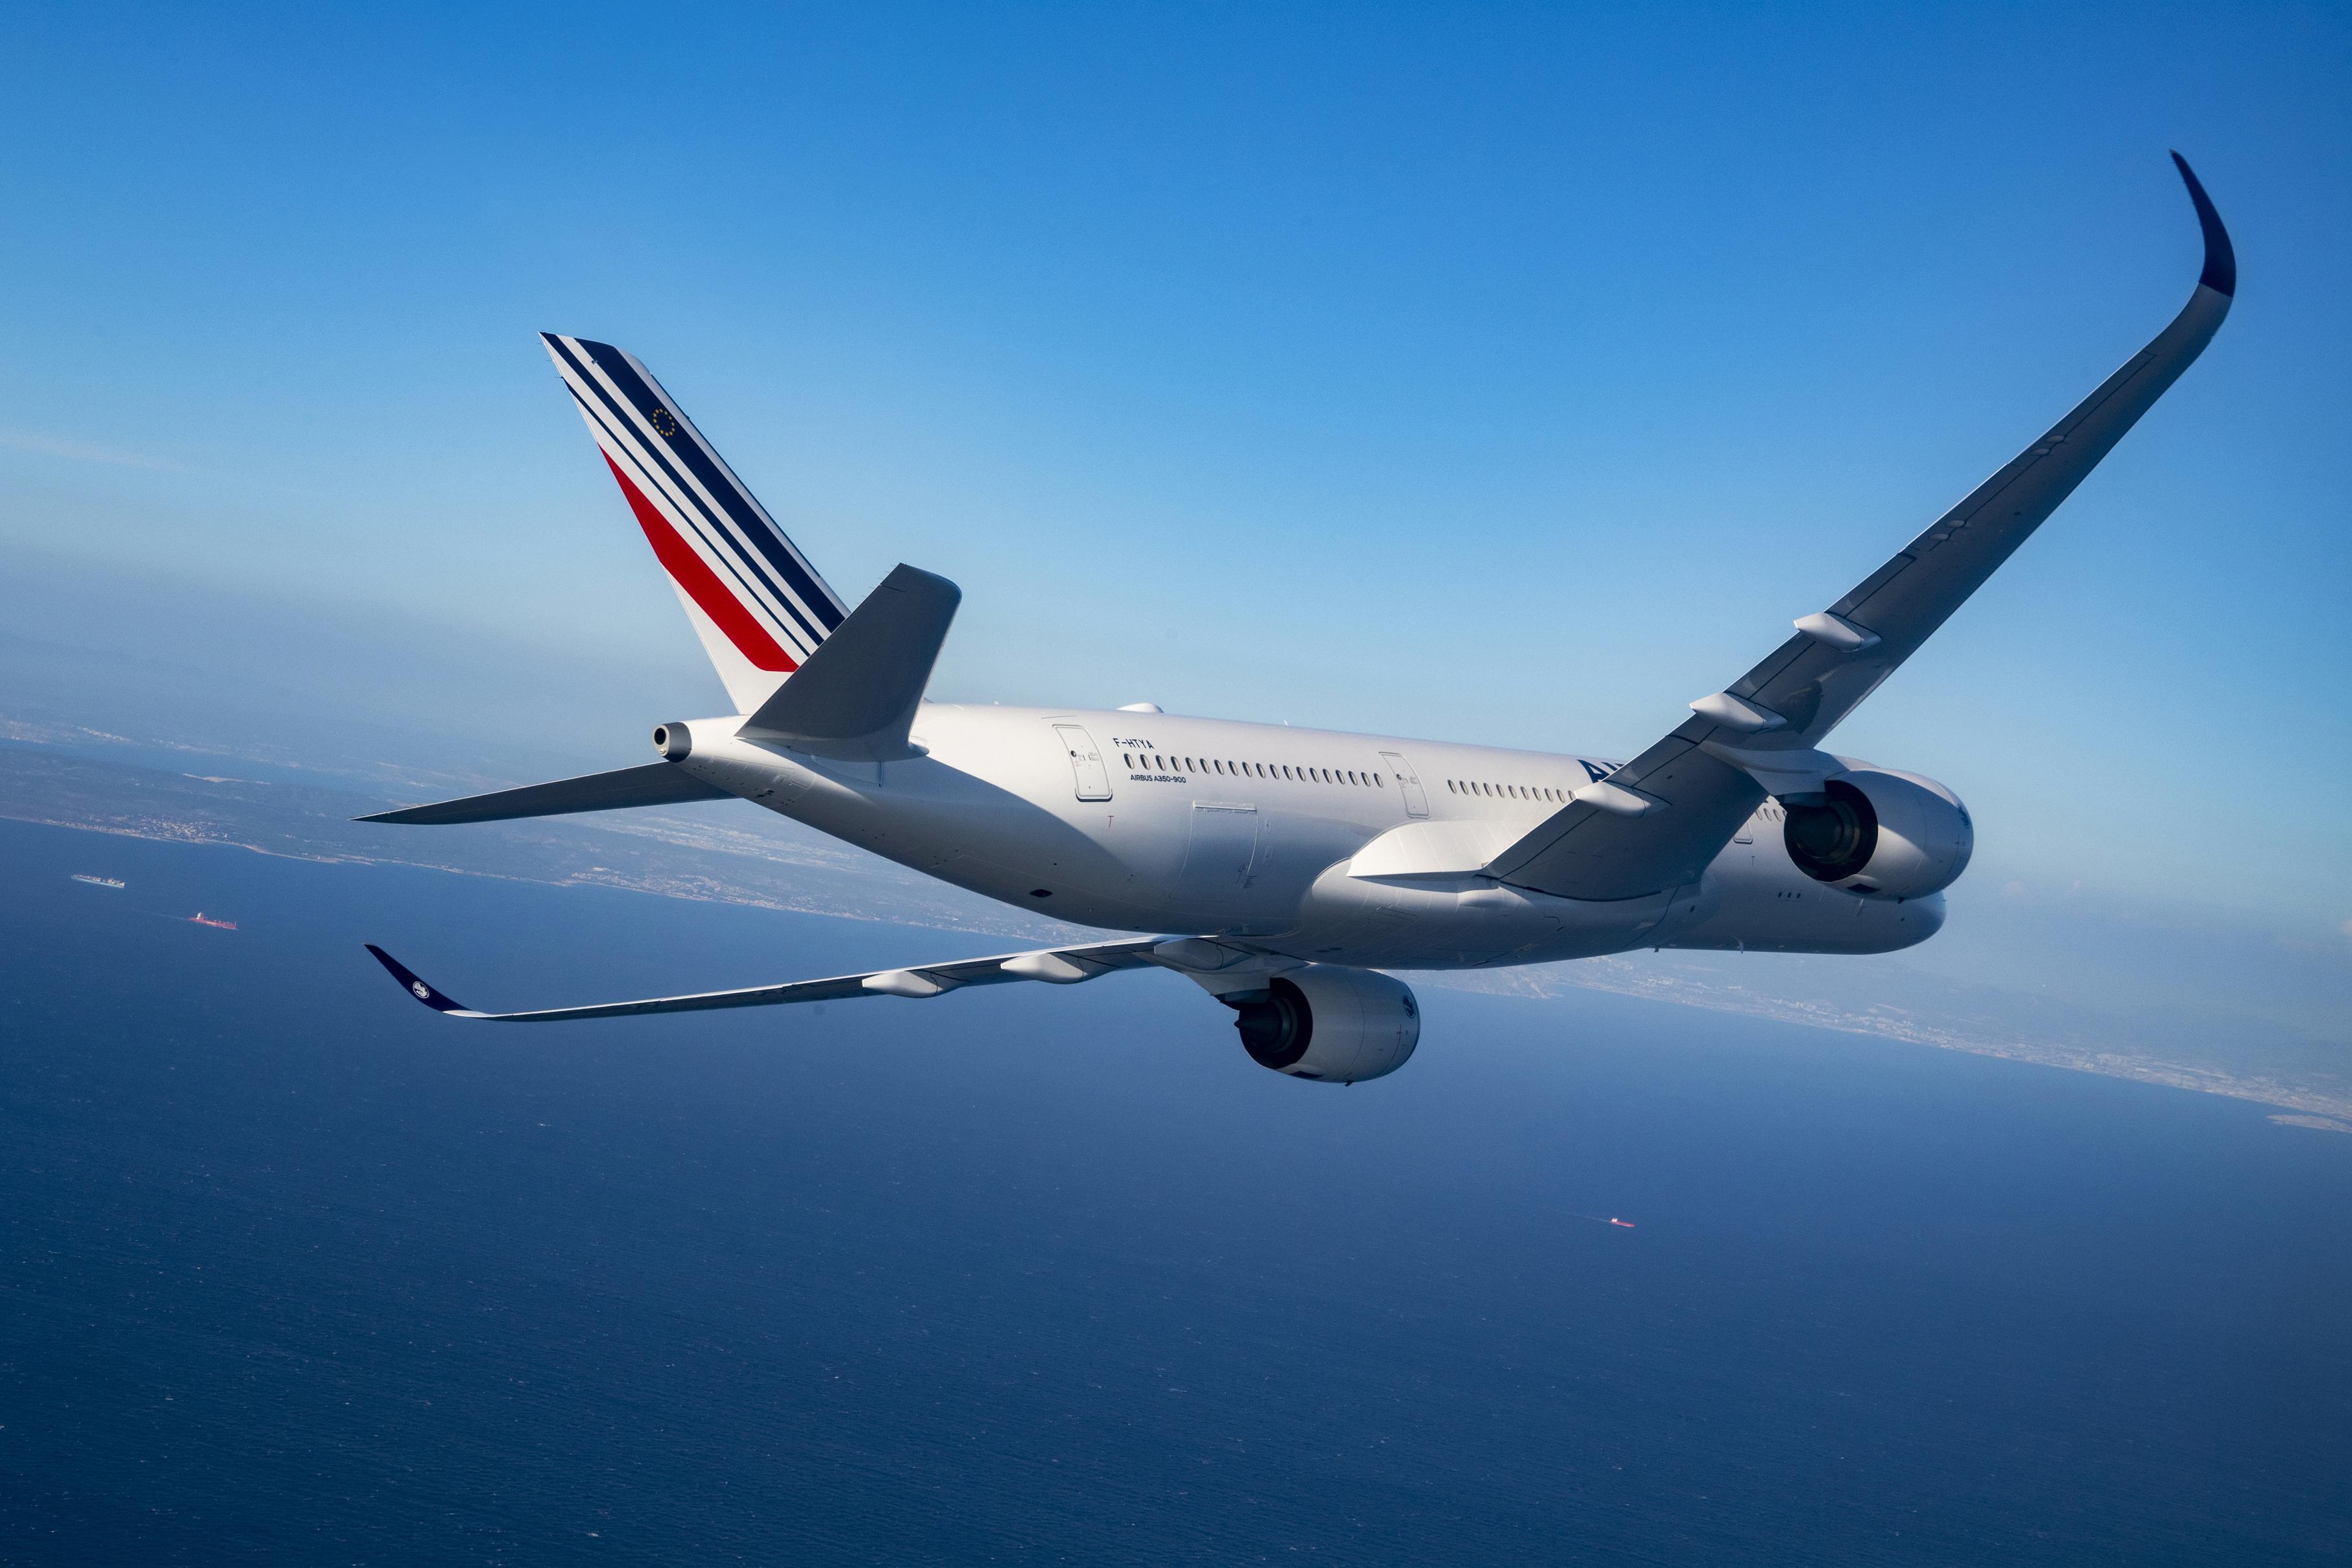 Air France A350-900 over water